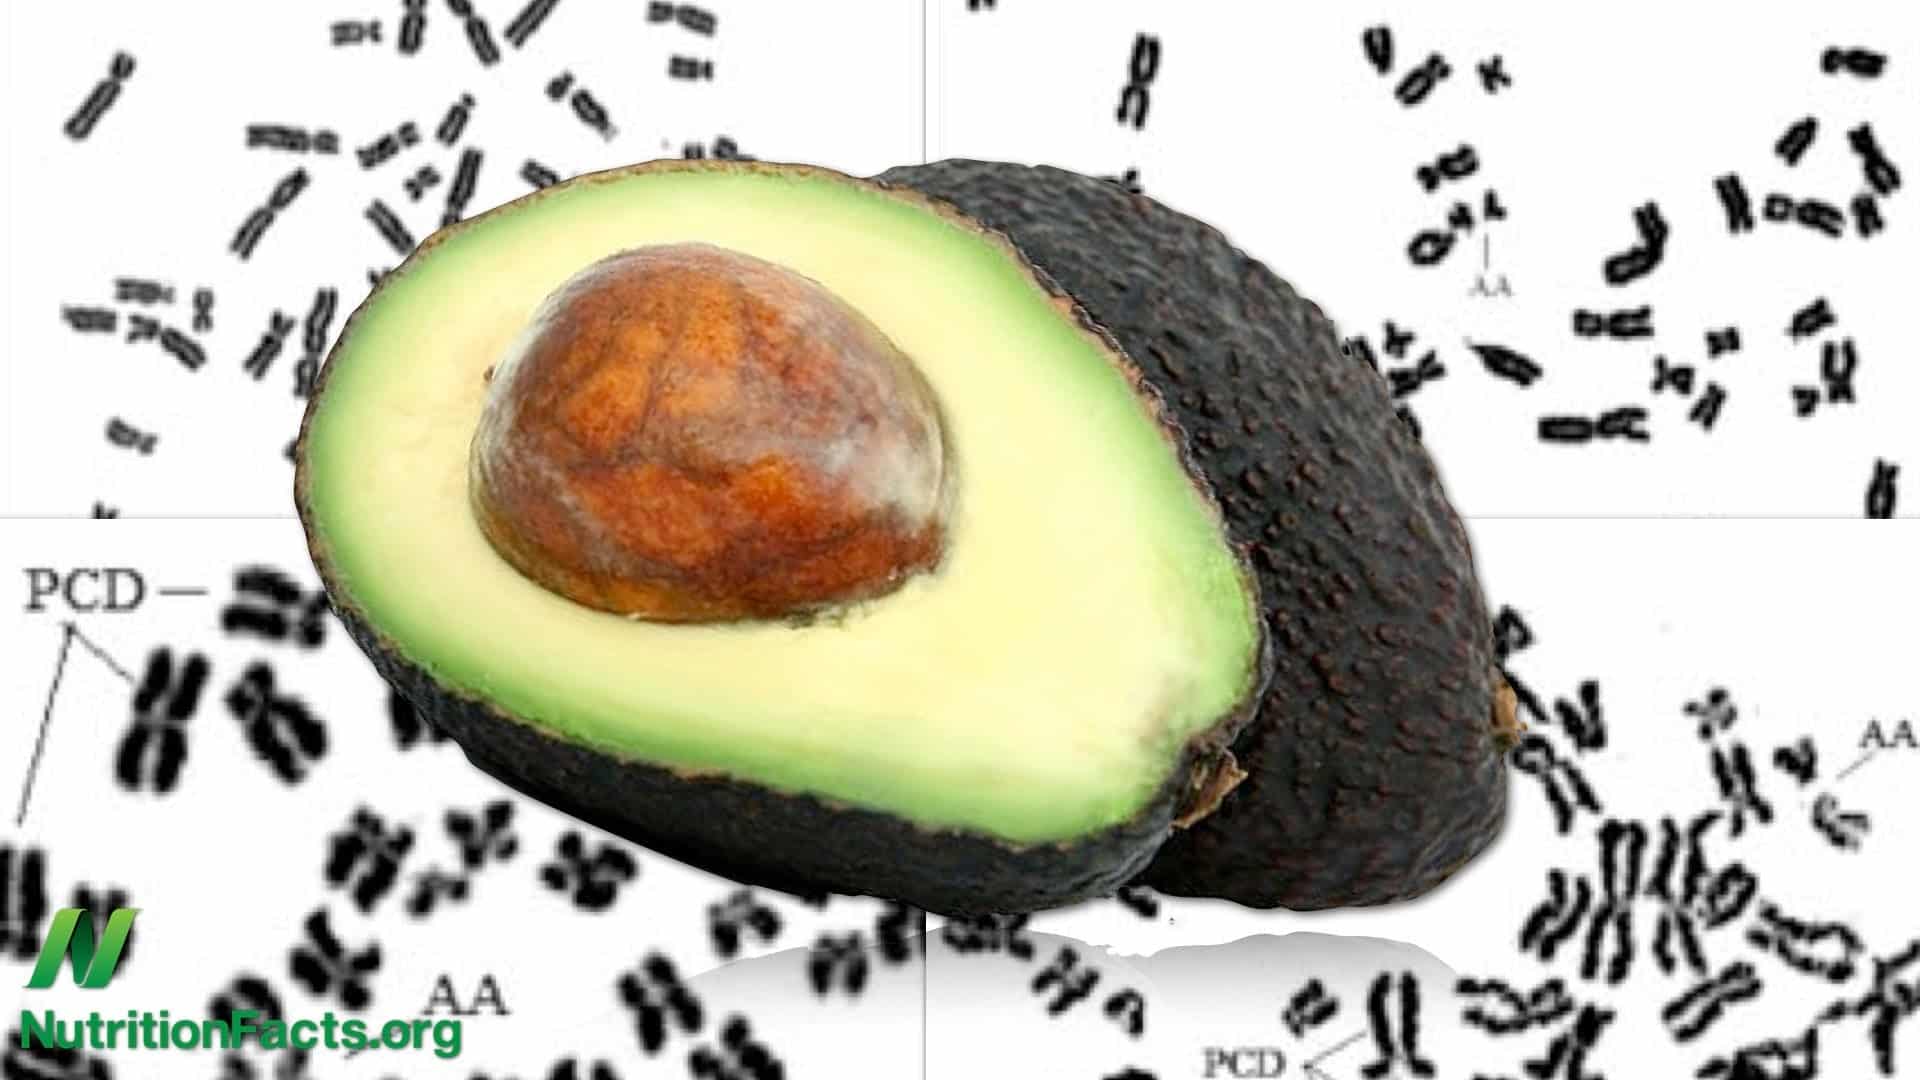 Are Avocados Bad for You?